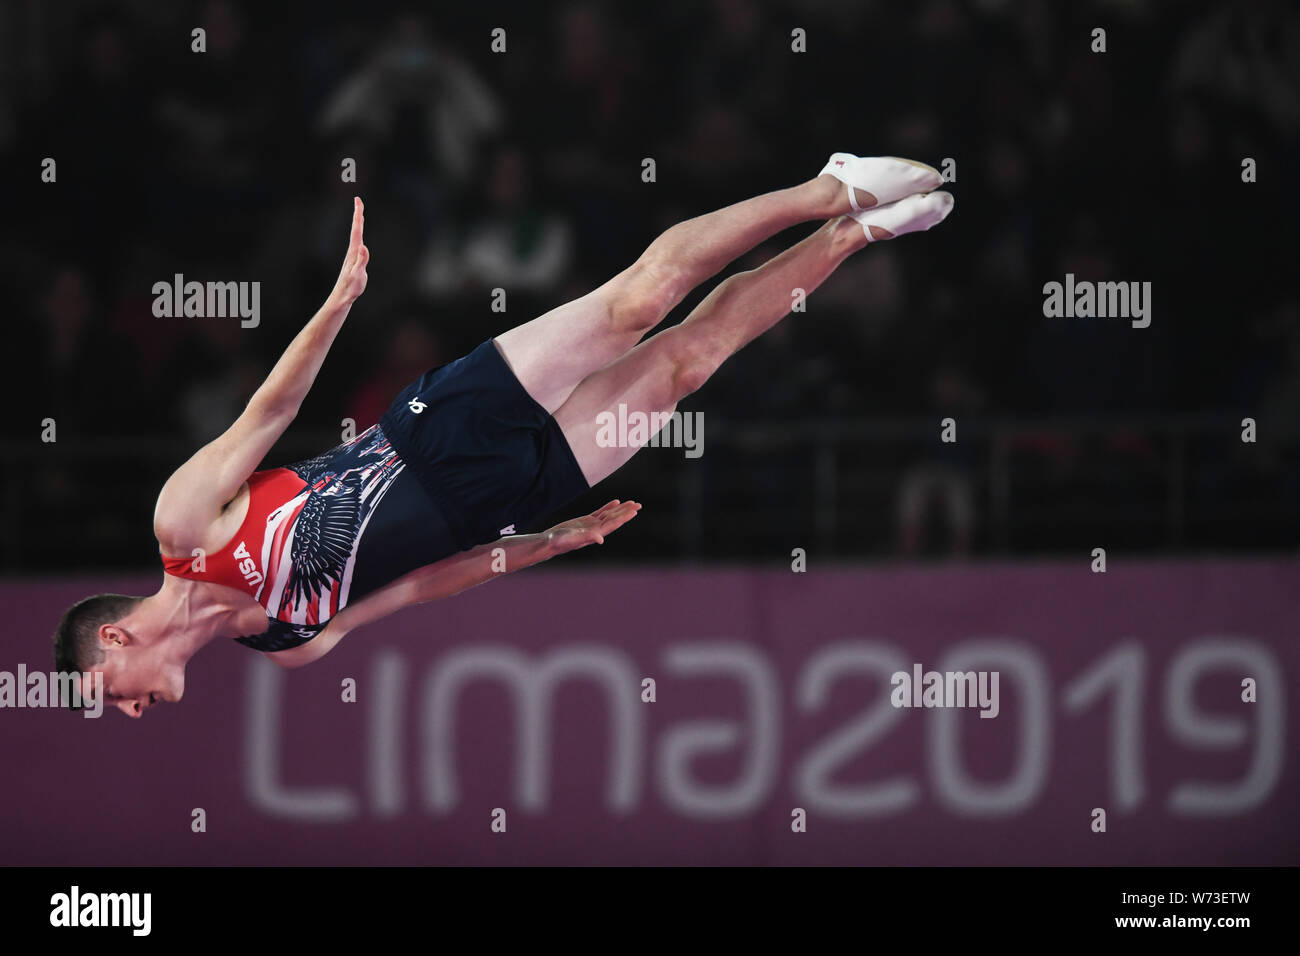 Lima, Peru. 4th Aug, 2019. JEFFREY GLUCKSTEIN from the US flips upside down during the competition held in the Polideportivo Villa El Salvador in Lima, Peru. Credit: Amy Sanderson/ZUMA Wire/Alamy Live News Stock Photo